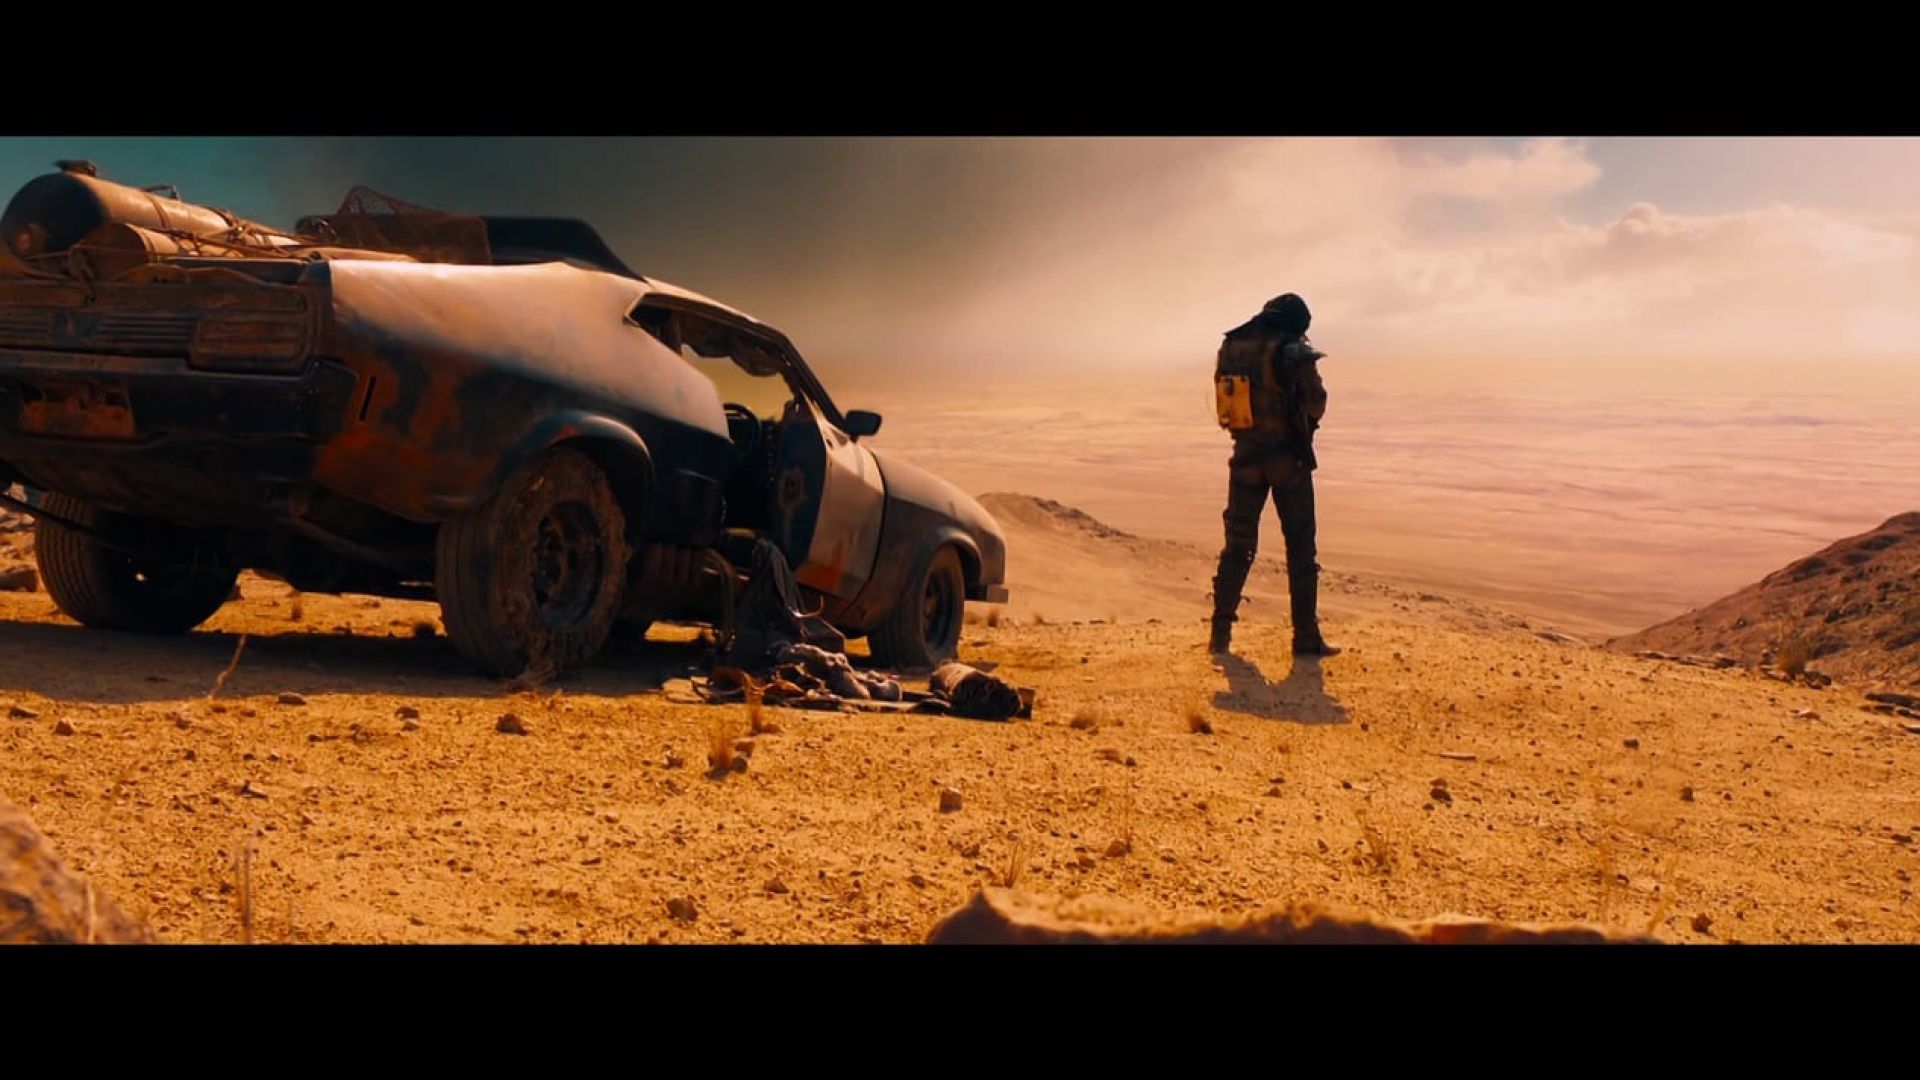 Let The World Go &#039;Mad Max&#039; in Cool Super-Cut Exploring the H